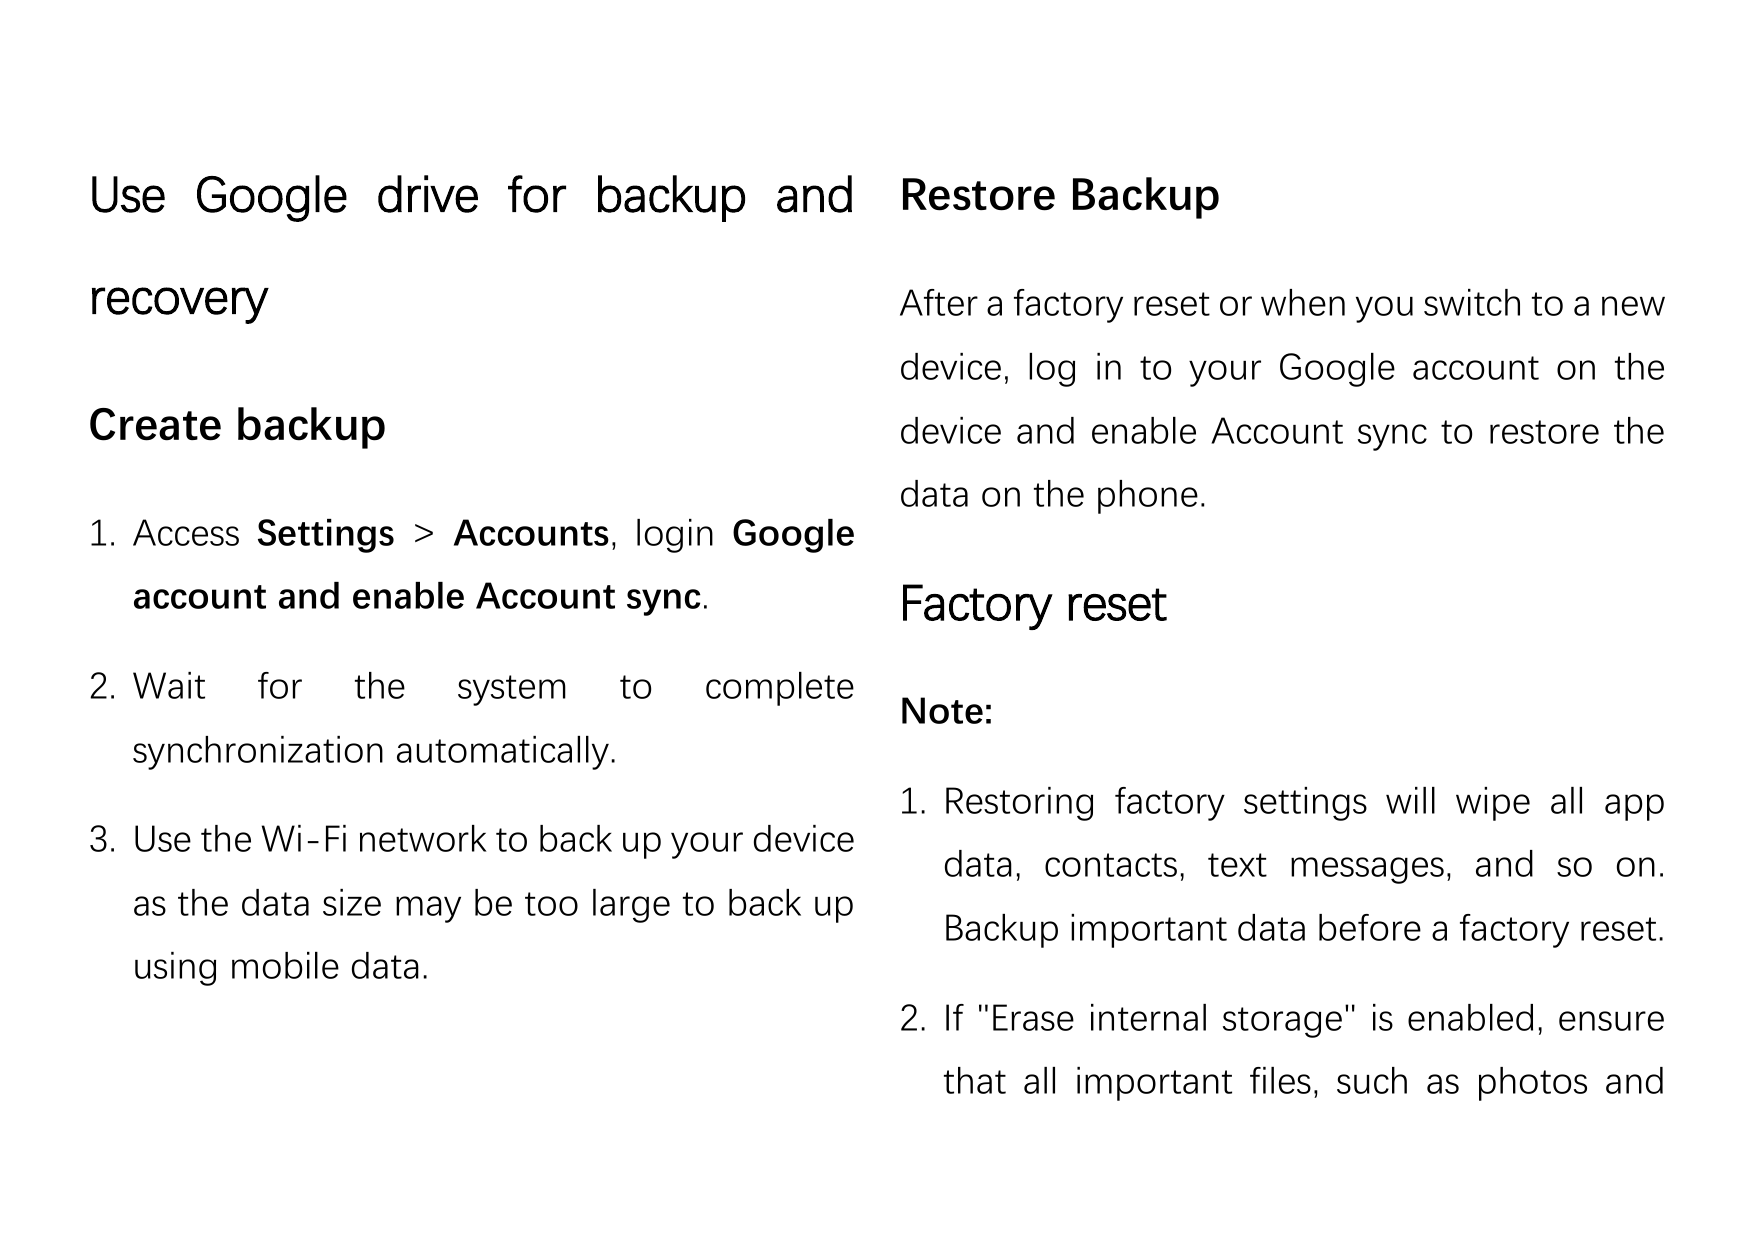 Use Google drive for backup and Restore BackuprecoveryAfter a factory reset or when you switch to a newdevice, log in to your Go